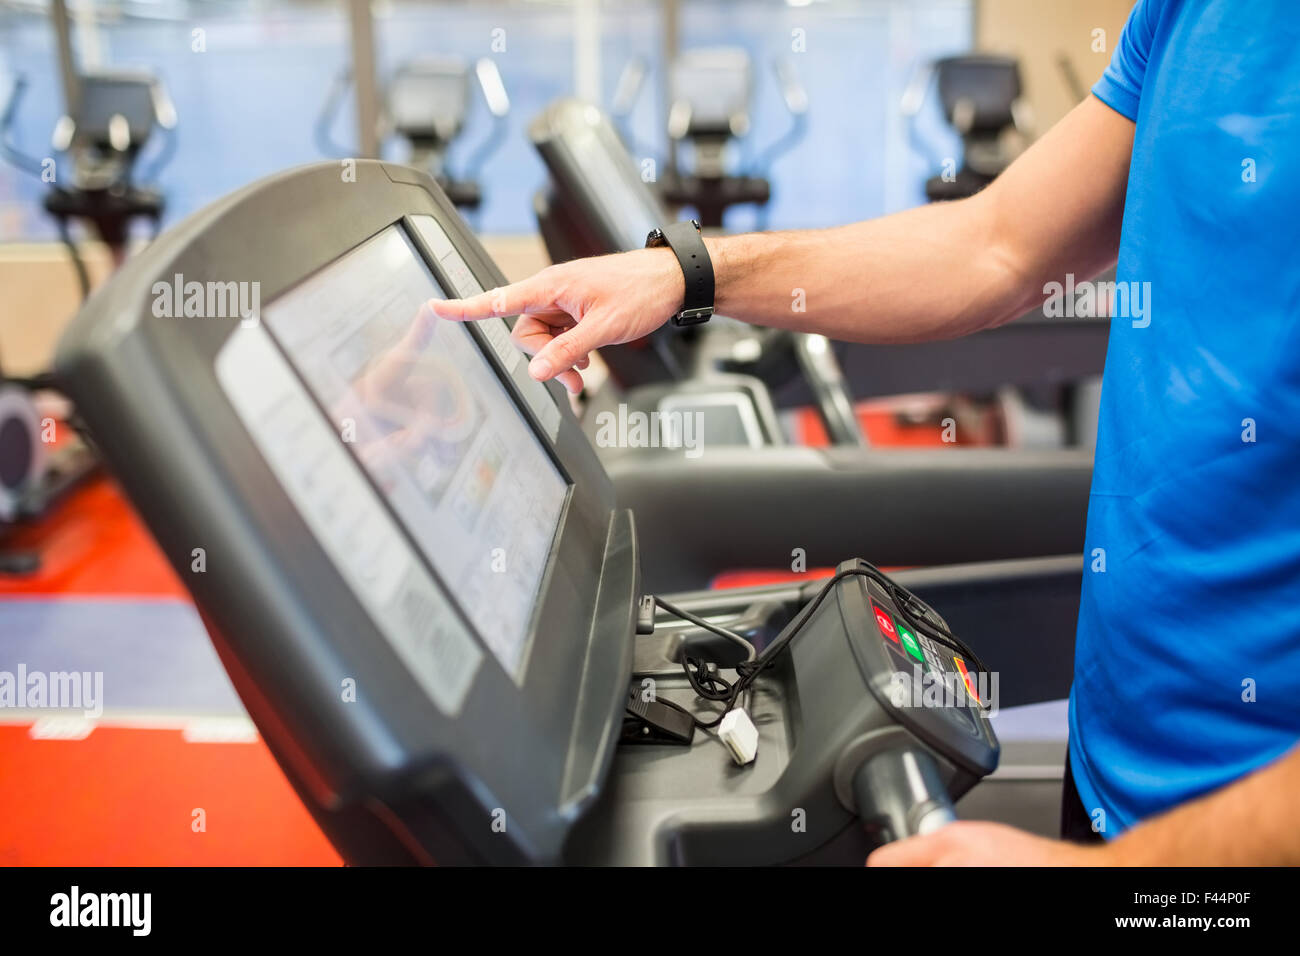 Man adjusting the settings of a treadmill Stock Photo